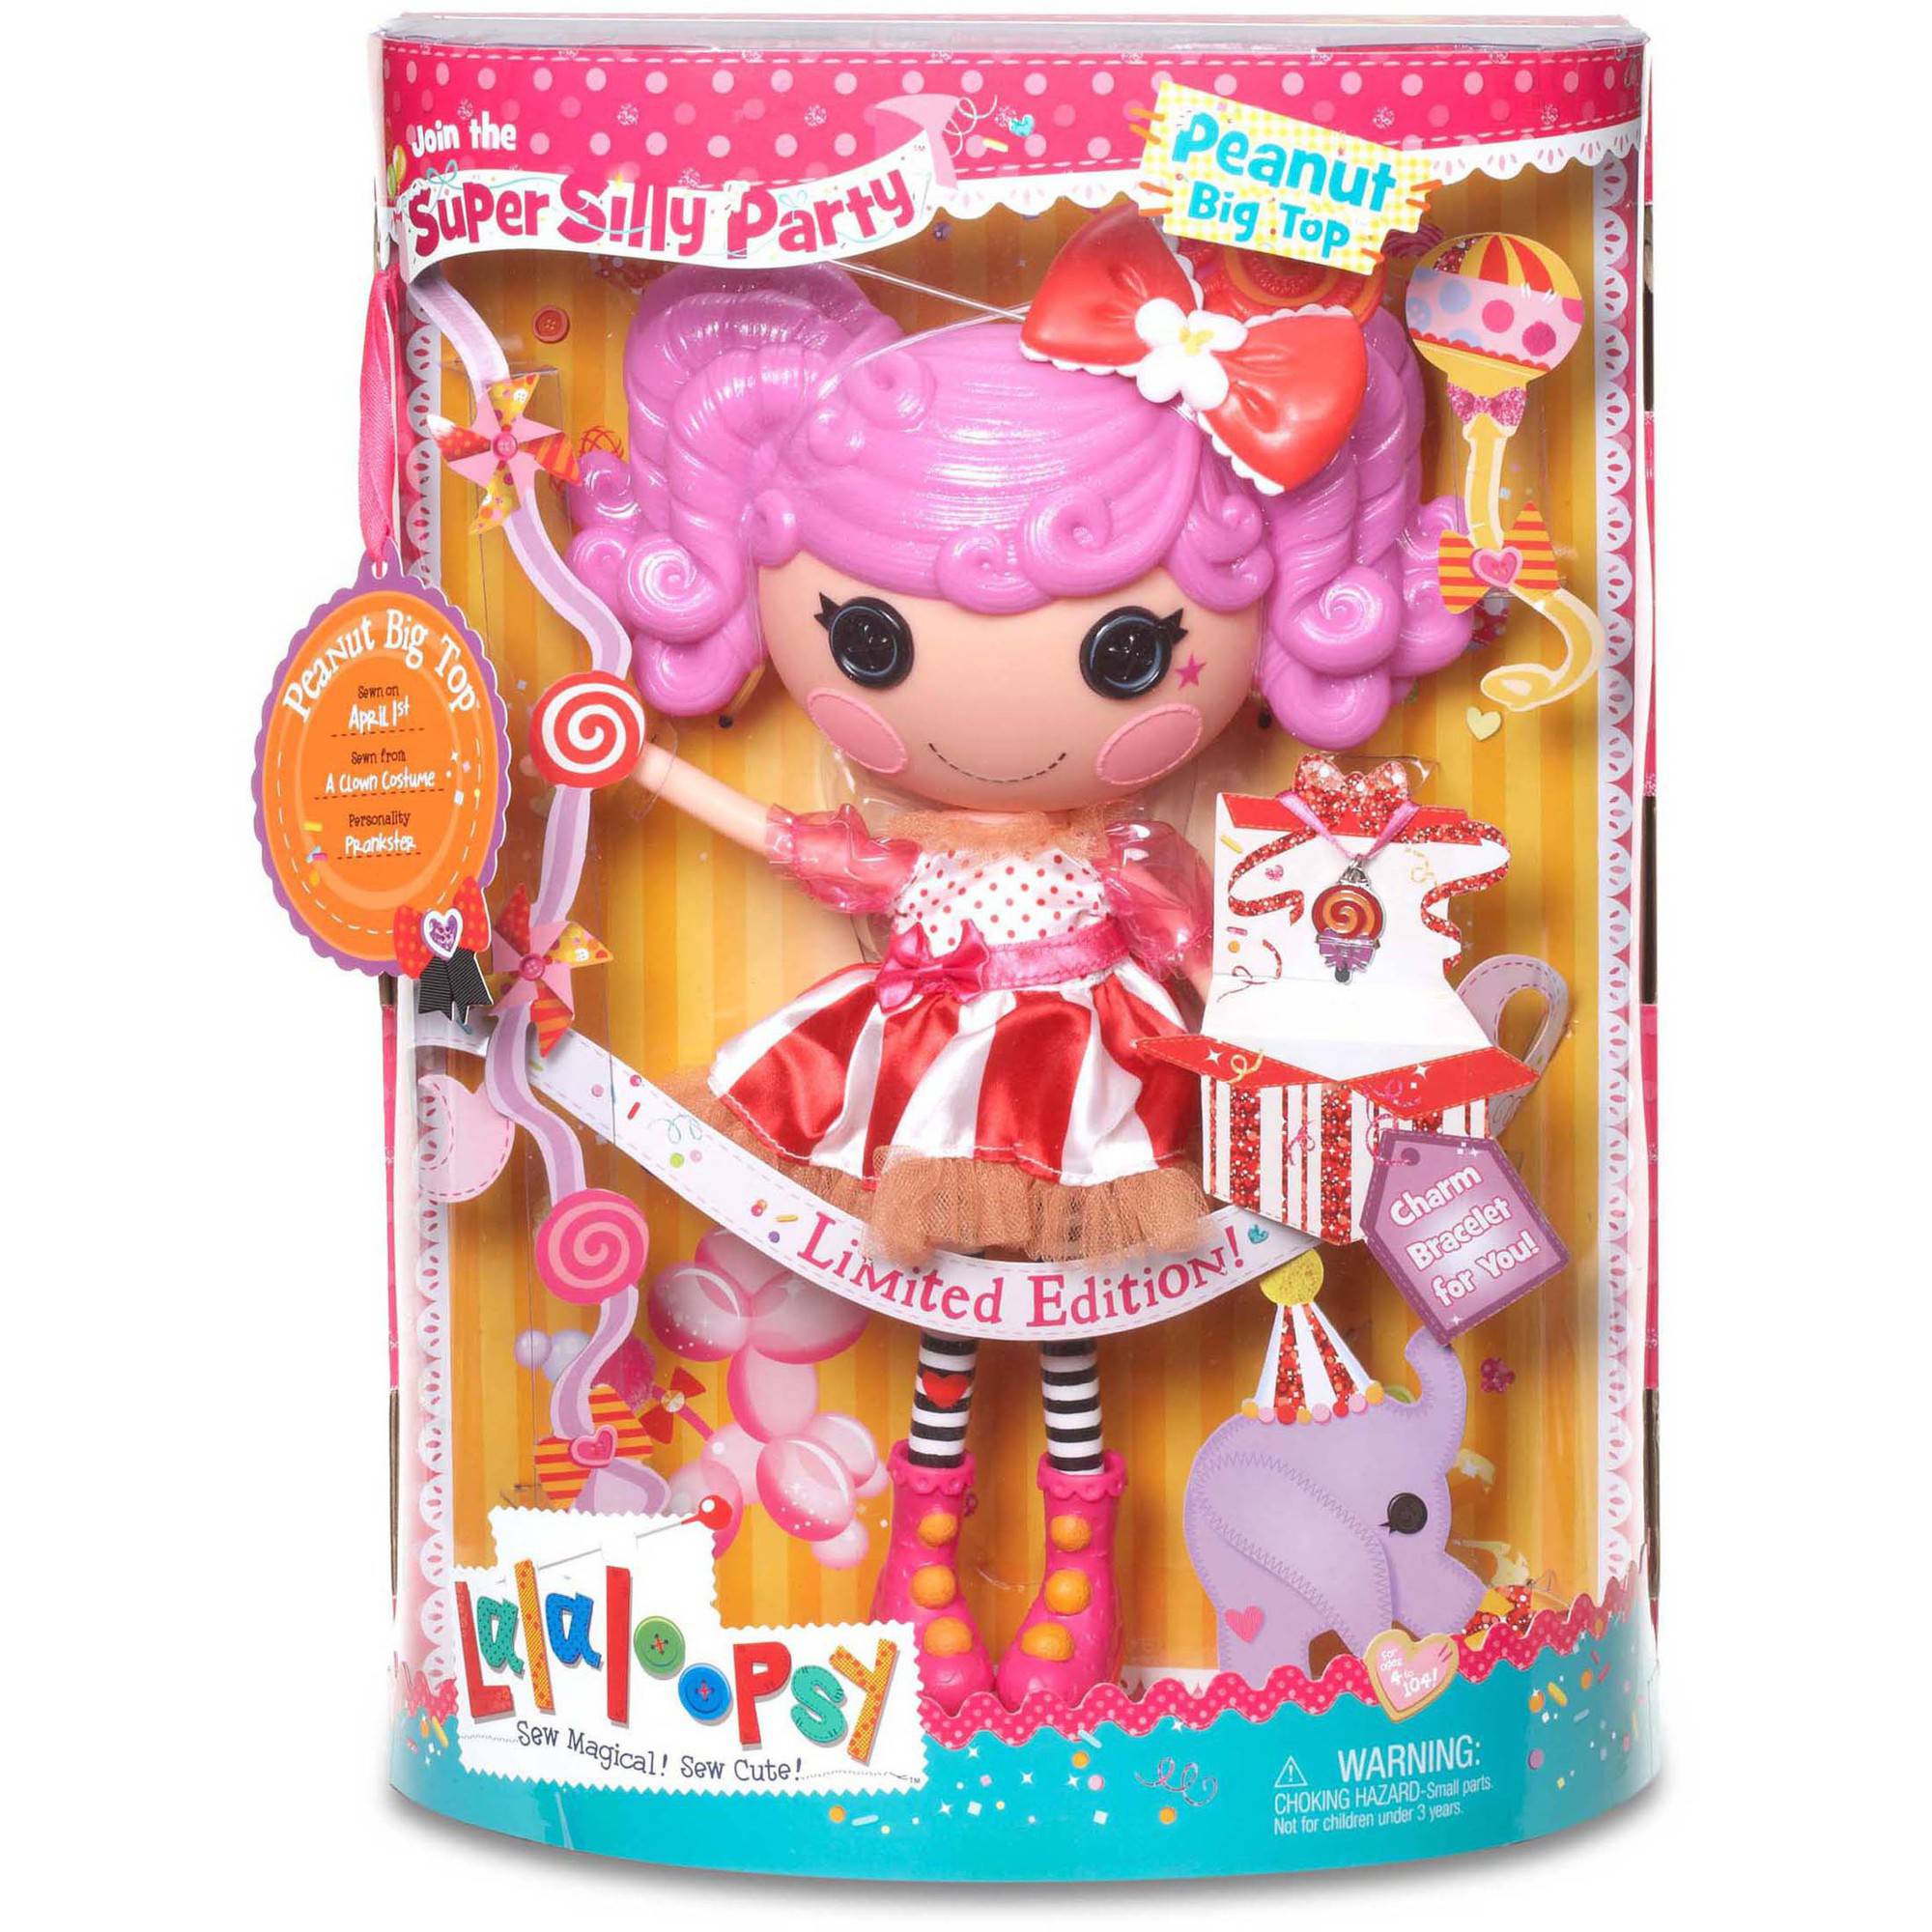 Lalaloopsy Super Silly Party Doll, Peanut Big Top - image 2 of 4